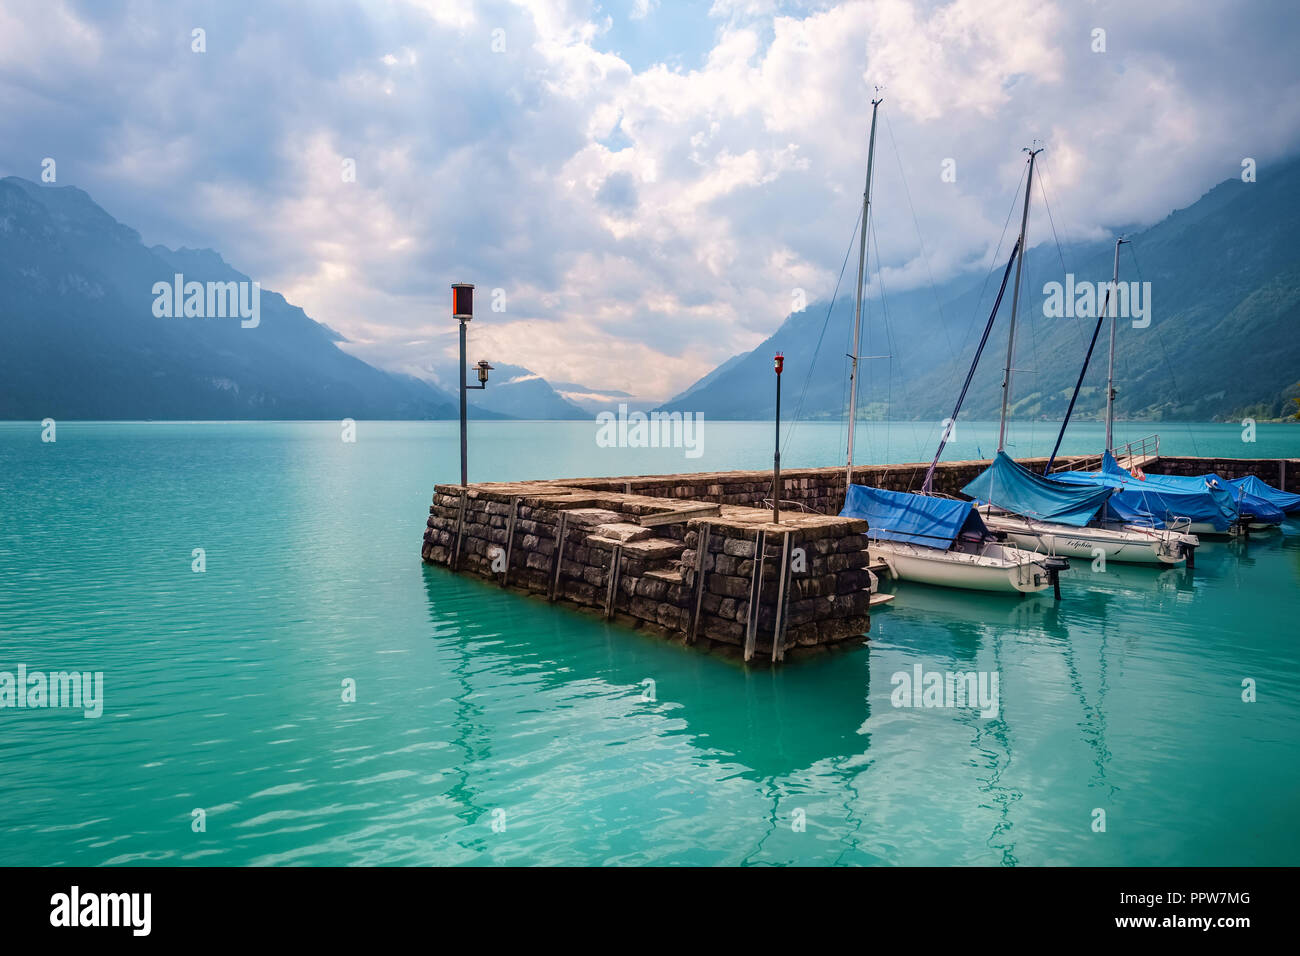 Brienz, Switzerland - September 10, 2015: Three Boats in the harbor of Brienz. Along its famous lake a promenade was built during World War I. Stock Photo